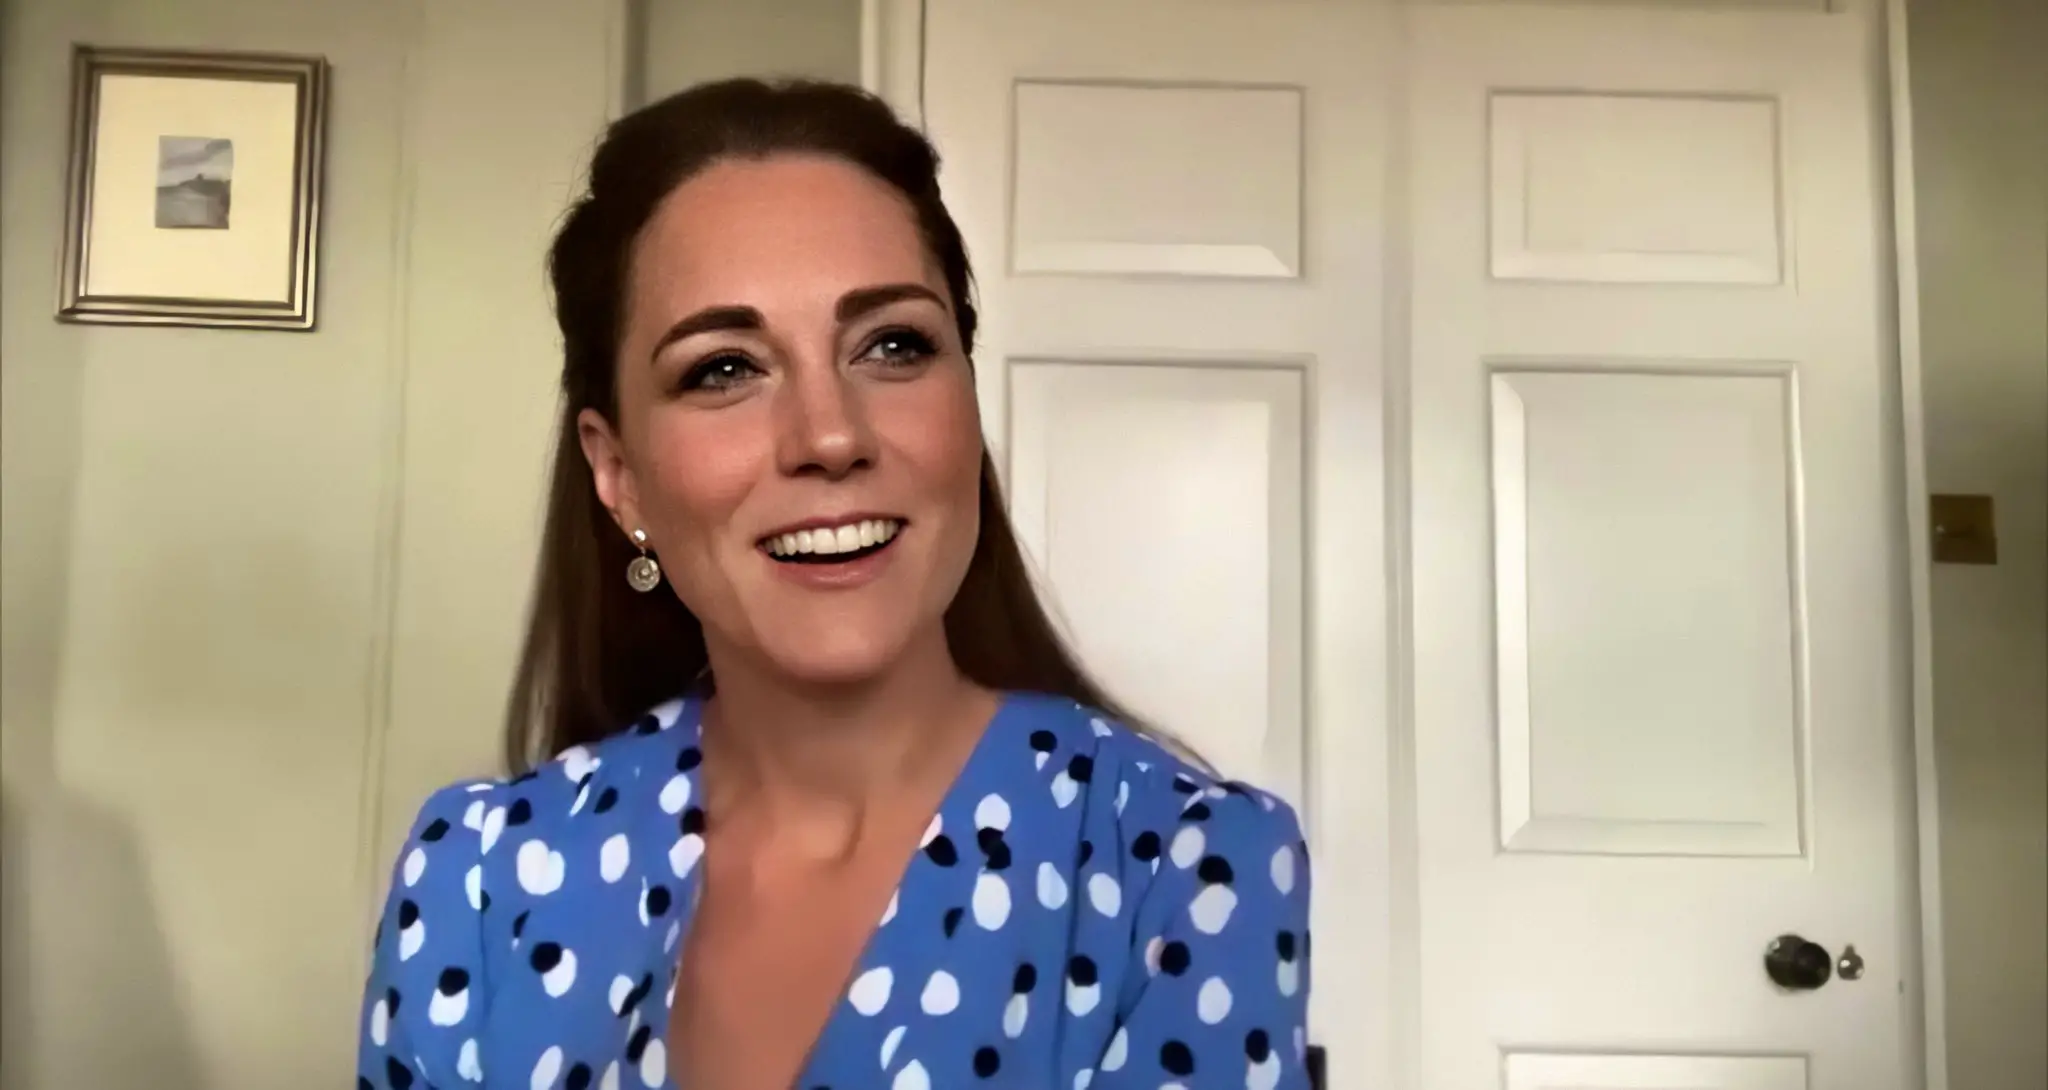 The Duchess of Cambridge made a video call to the nurses around the globe on international nurses day. She wore Altuzarra Aimee Polka-Dot Button-Front Dress